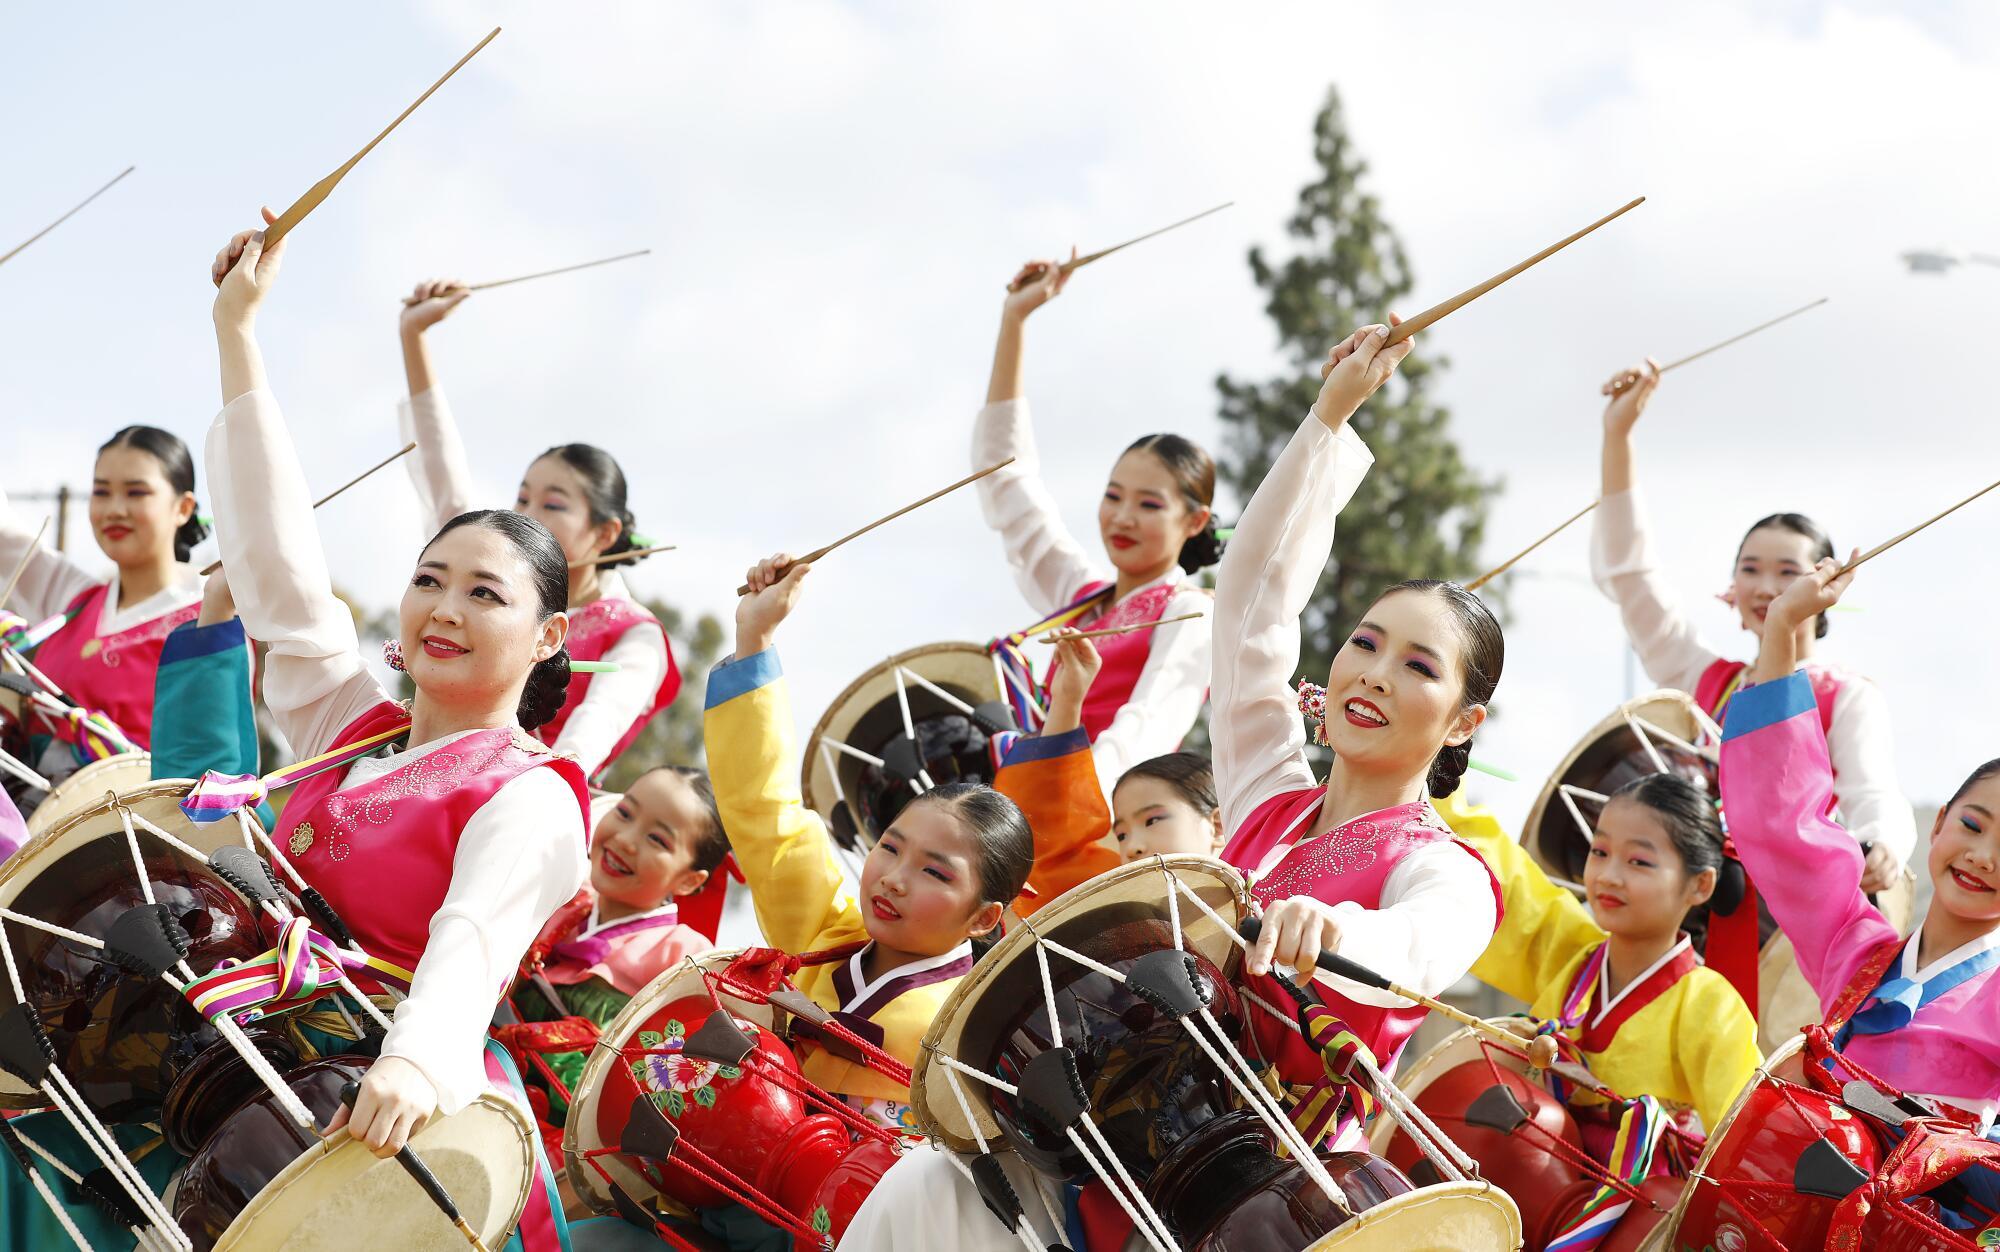 Korean Dance Company, presented by Kim Eung Hwa, participates in the 38th Annual Kingdom Day Parade in Leimert Park.